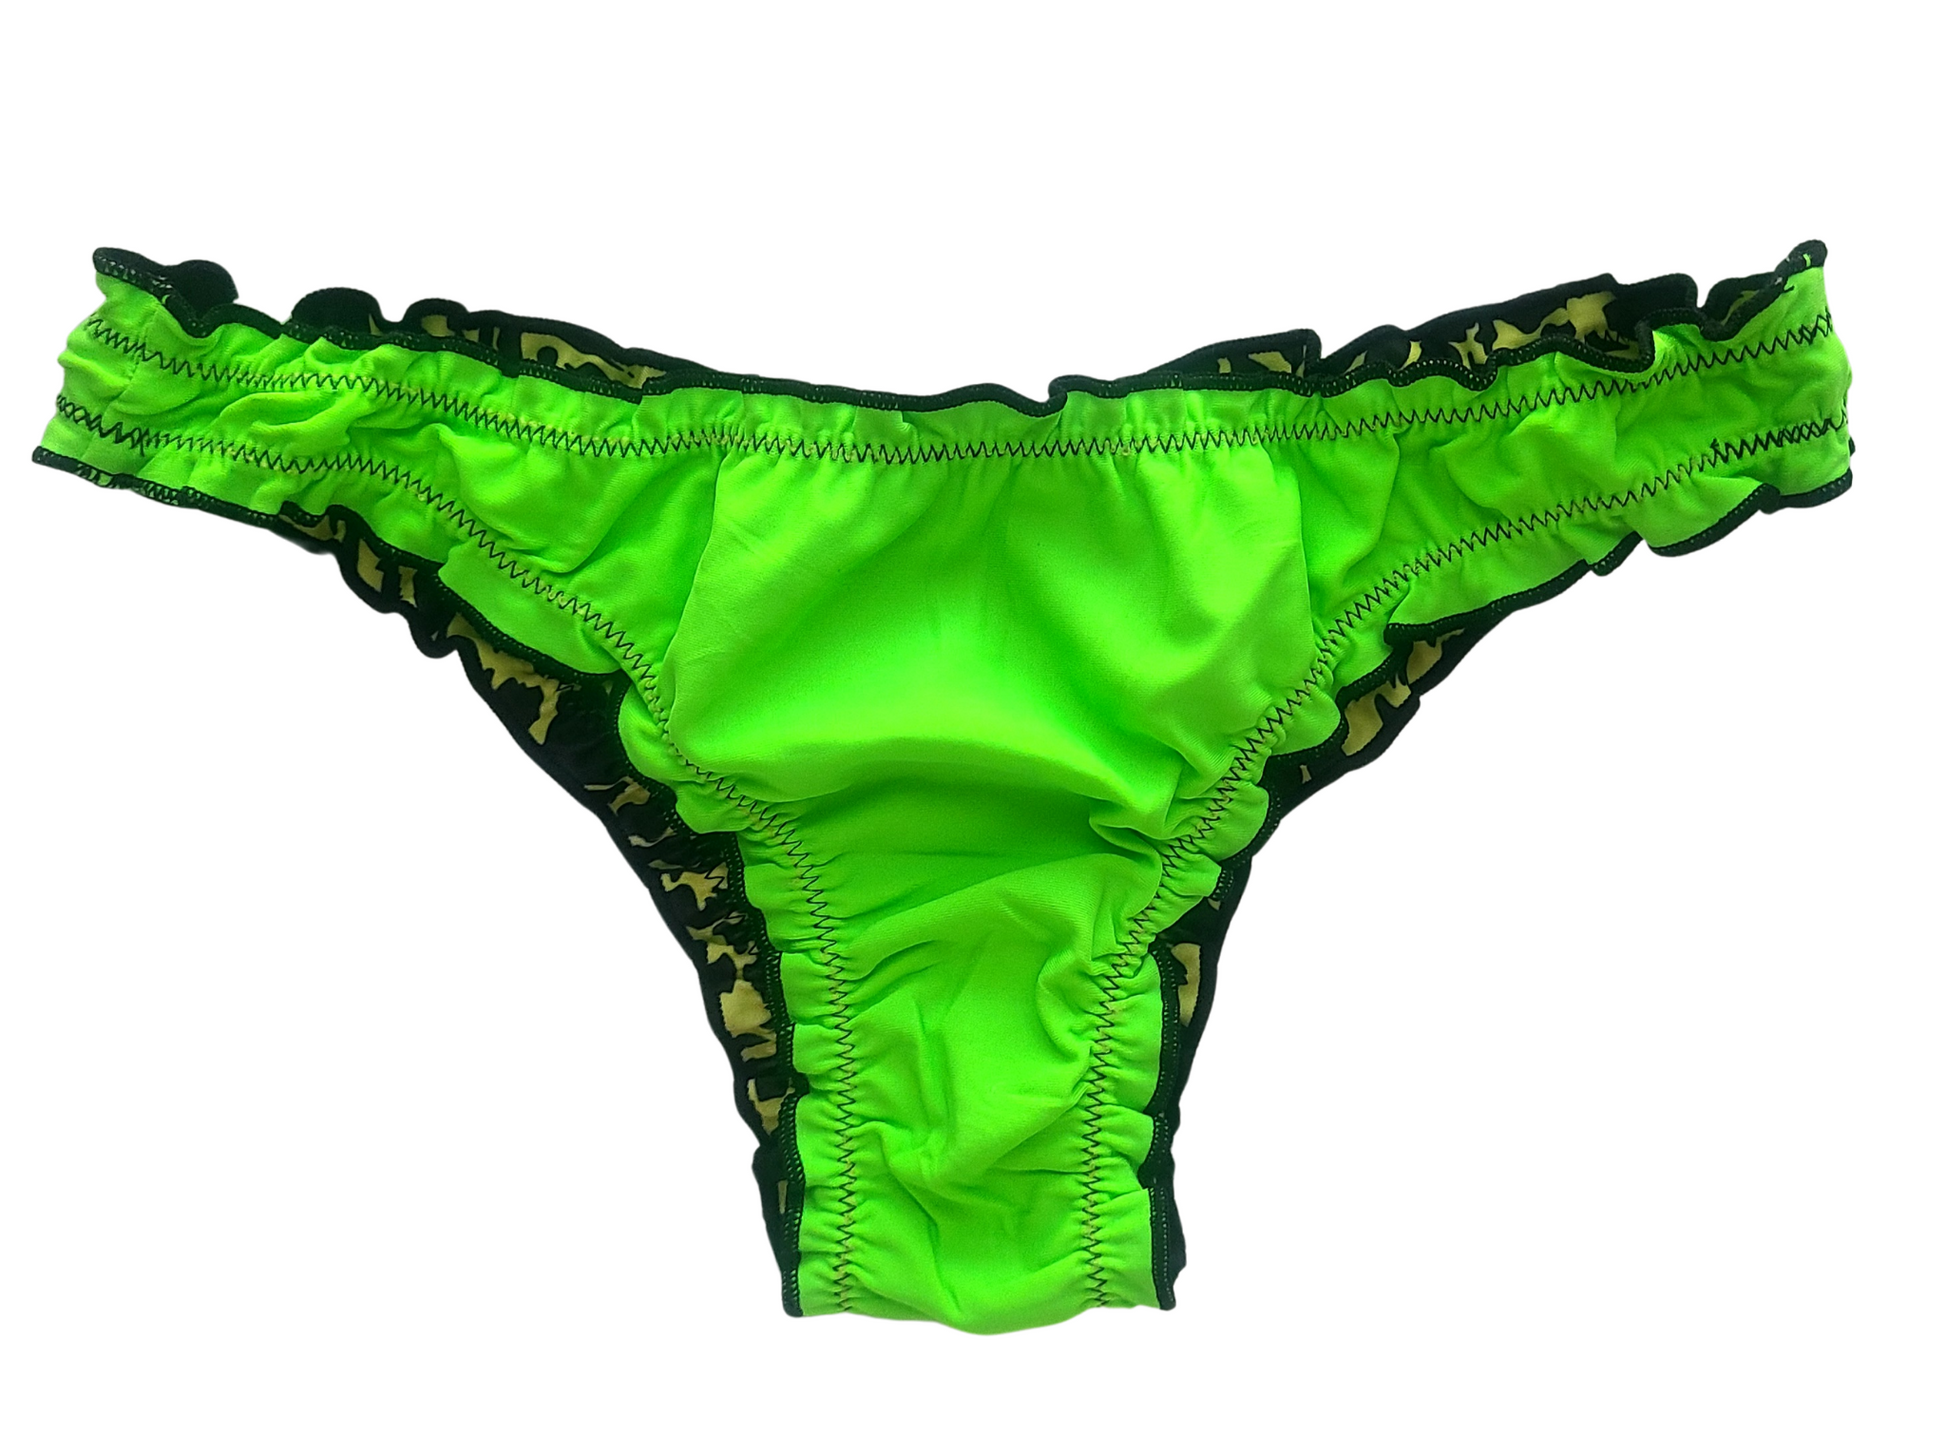 Woman wearing a reversibl4e ruffled bikini set that changes fro4m green neon to leopard print, comple4te with braided tie straps, central 4seam on the back of the piece, cheeky4 bottom, and removable cups, perfect 4for a bold and versatile beach or pool day look.